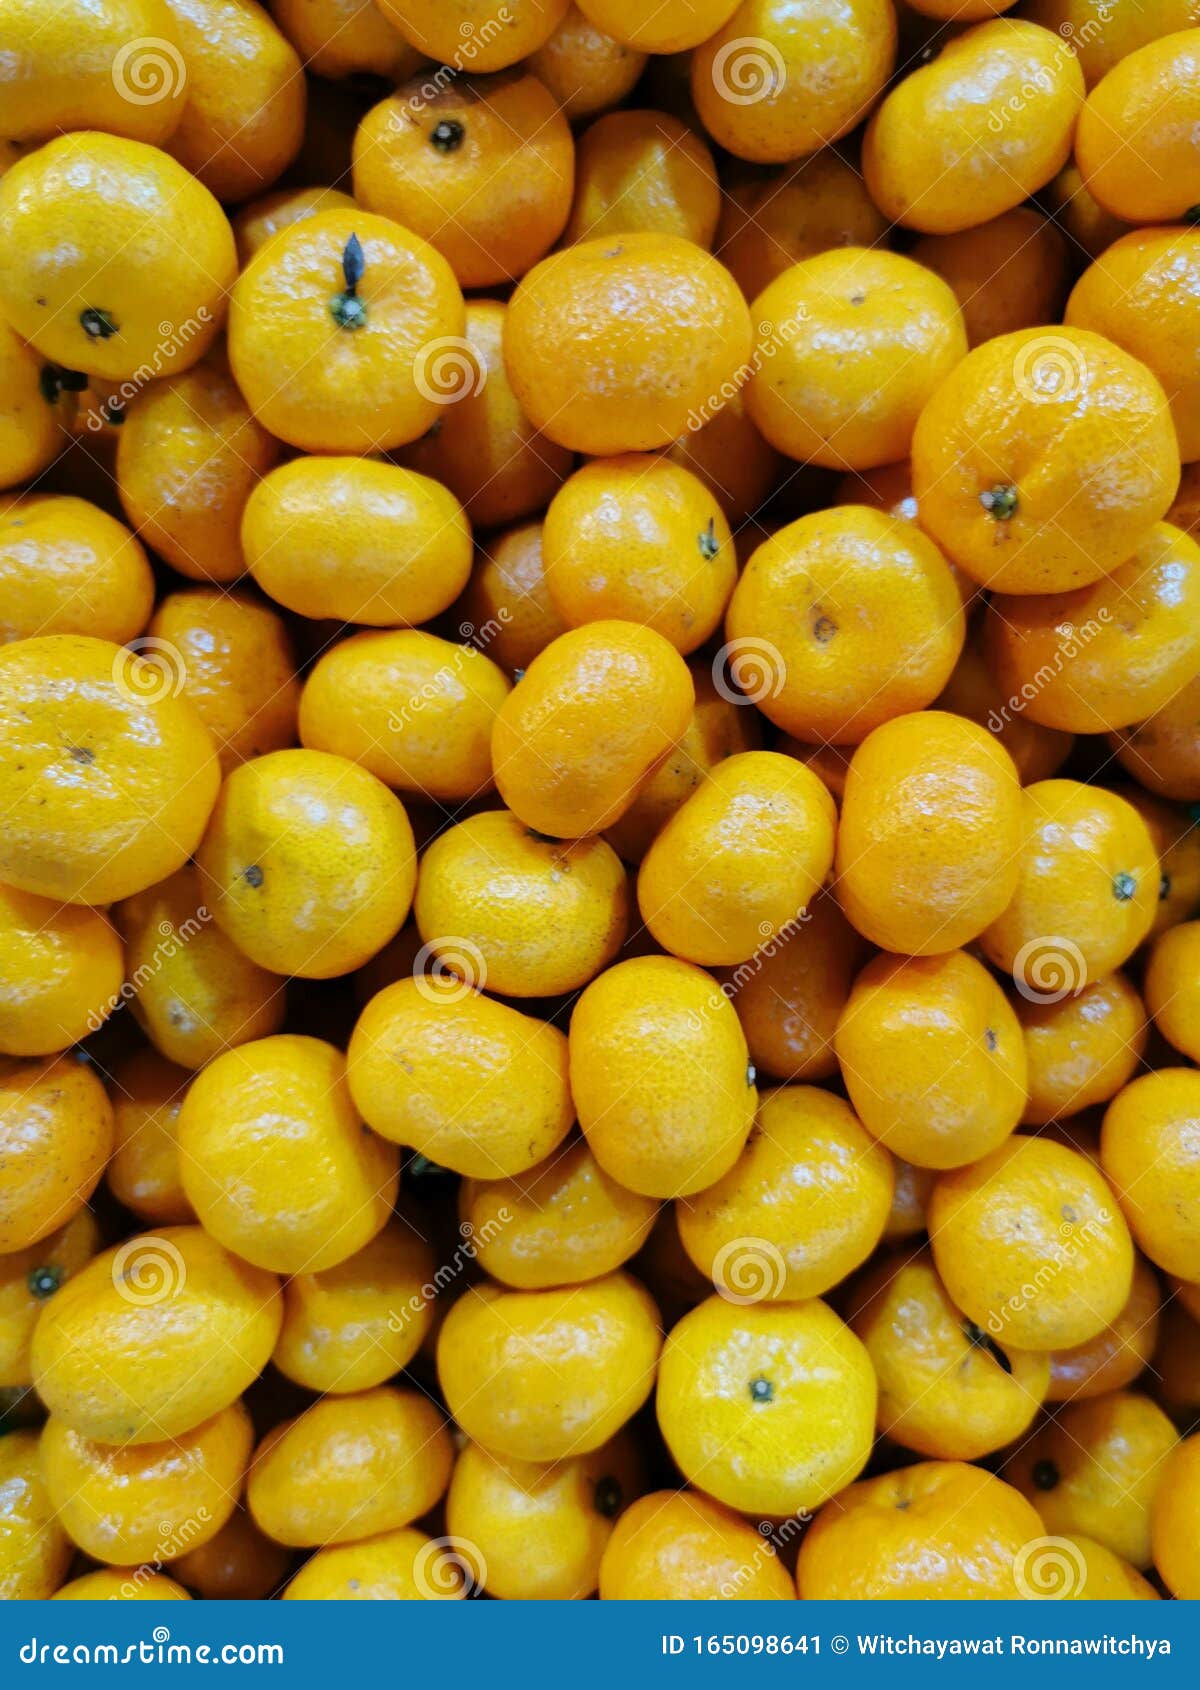 Small Oranges Are A Fruit Of A Small Species Lovely Shape Delicious